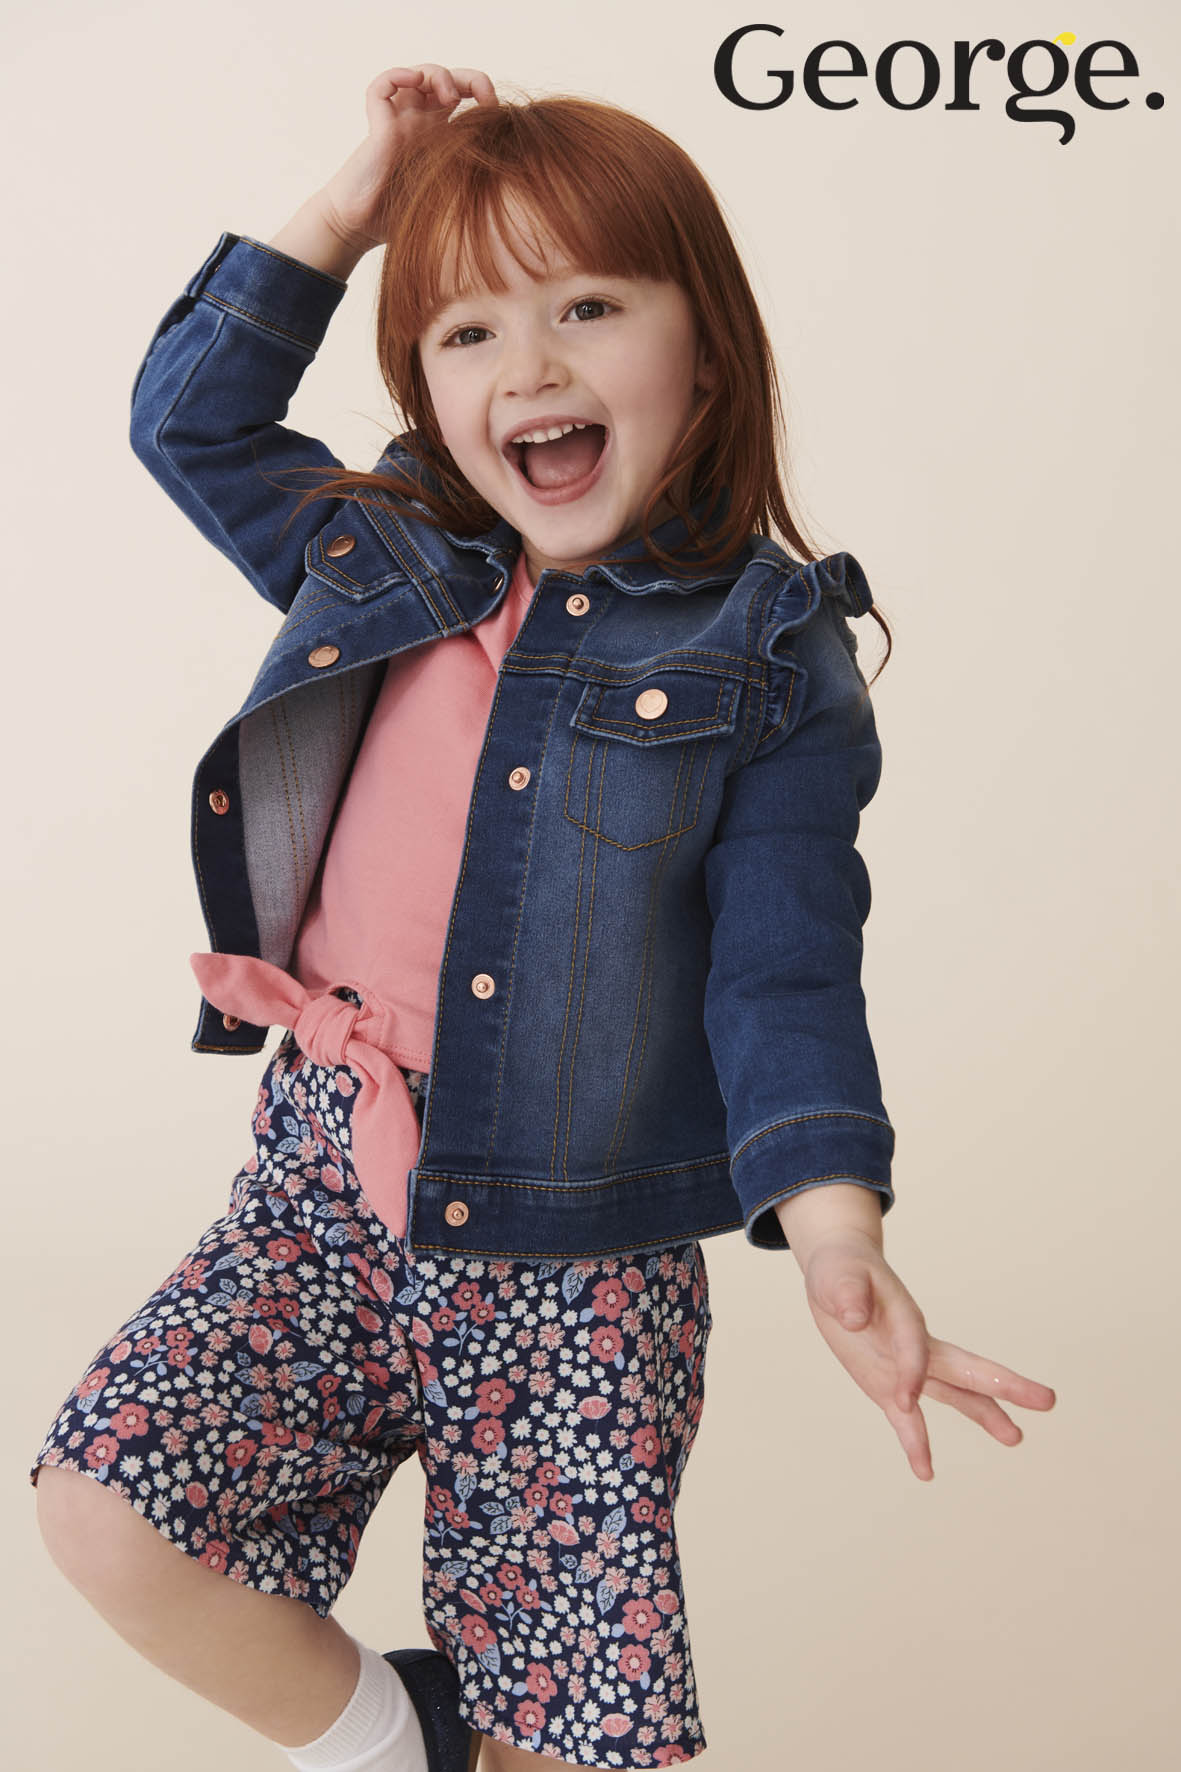 Maisie for George Asda – Bruce and Brown